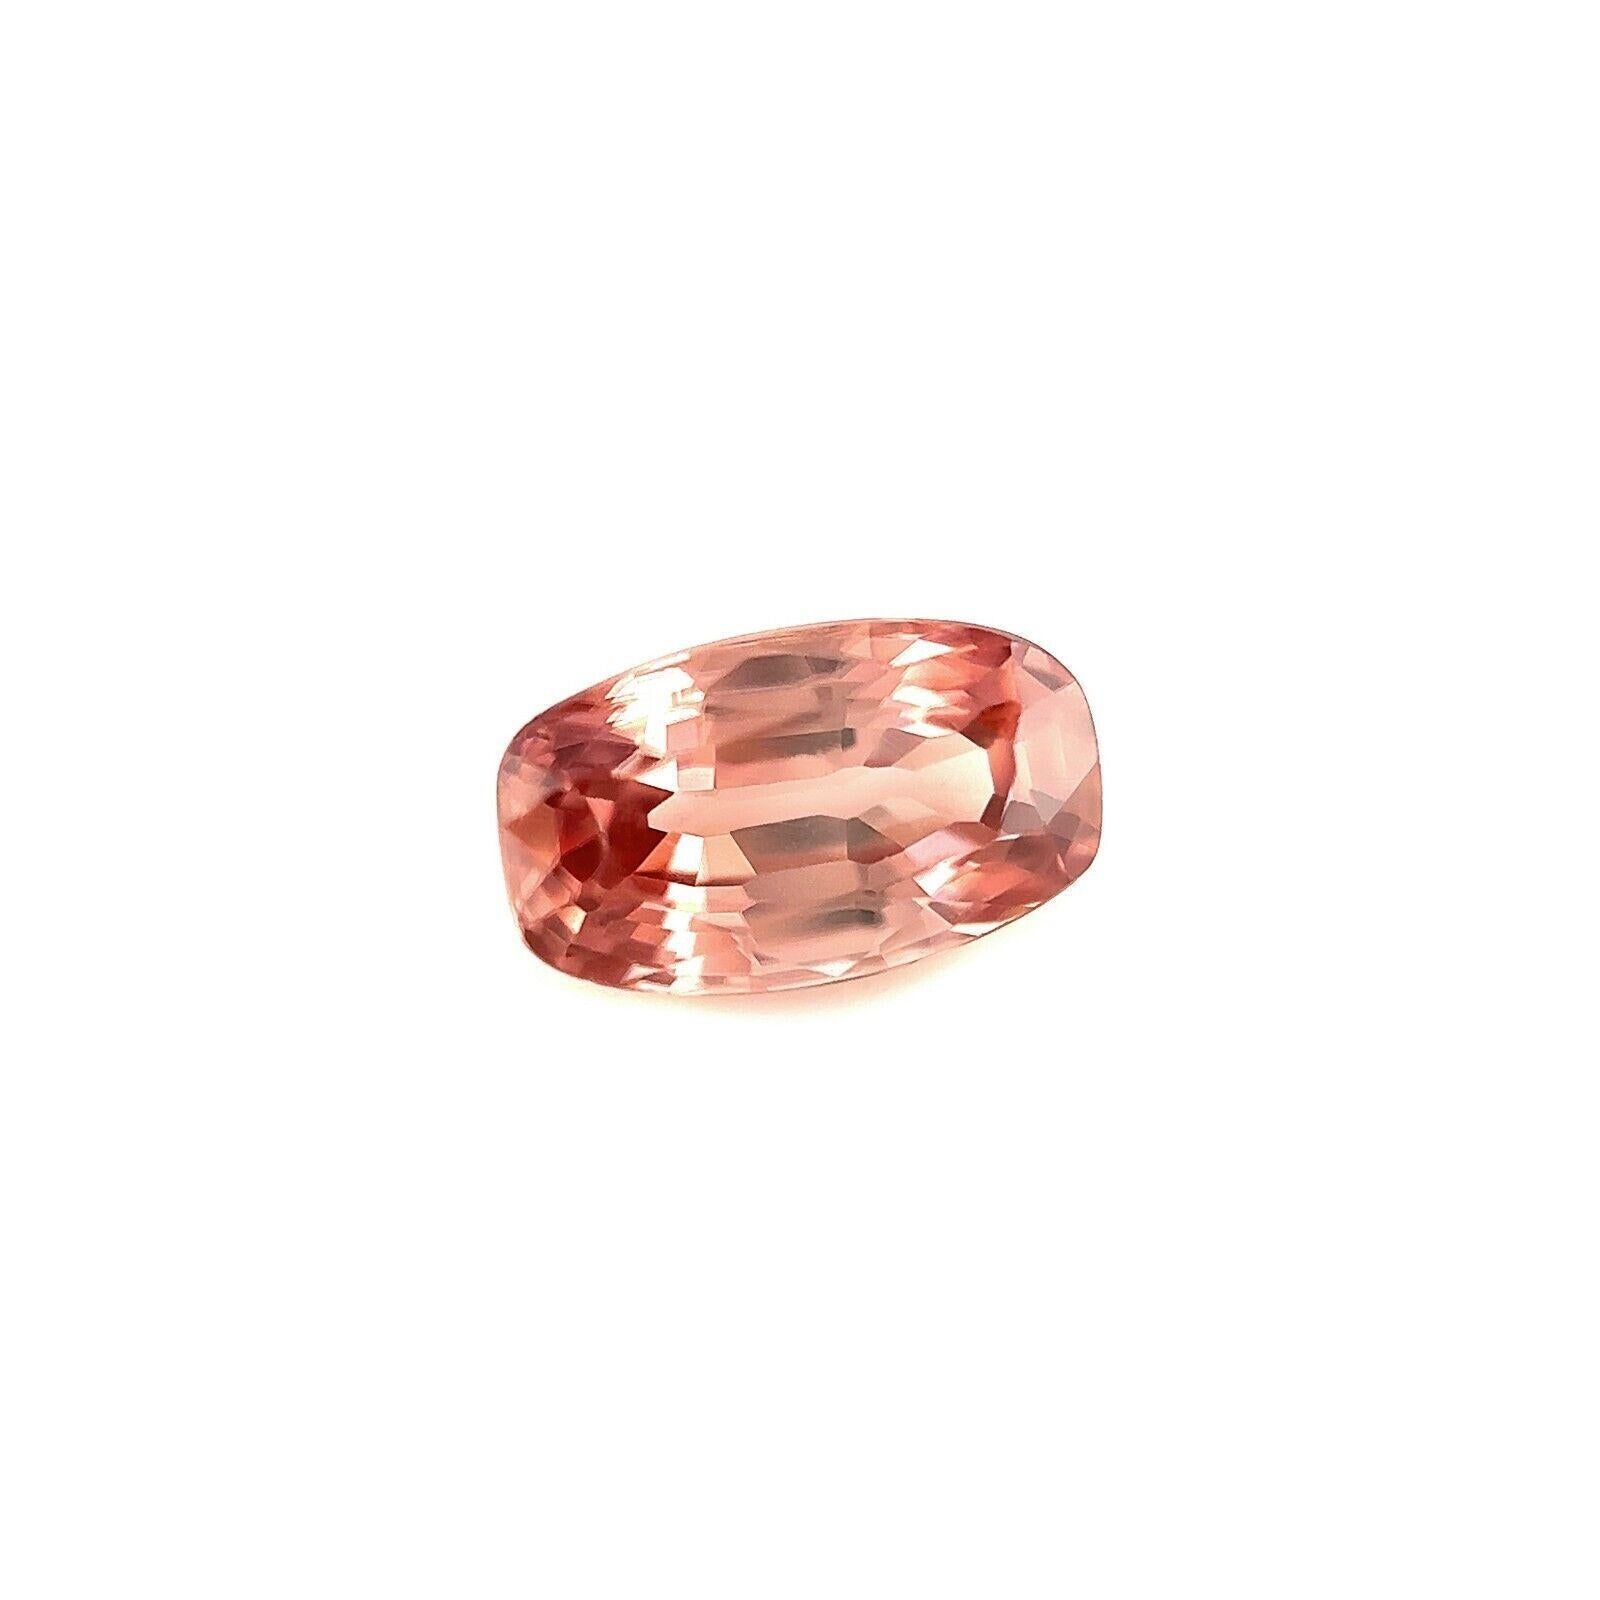 Natural Fine Pink Zircon Gemstone.

1.92 Carat with a beautiful pink colour and excellent clarity, VVS.

Also has an excellent cushion cut and polish to show great shine and colour, would look lovely in jewellery.

Measures 8.8 x 5.2 x